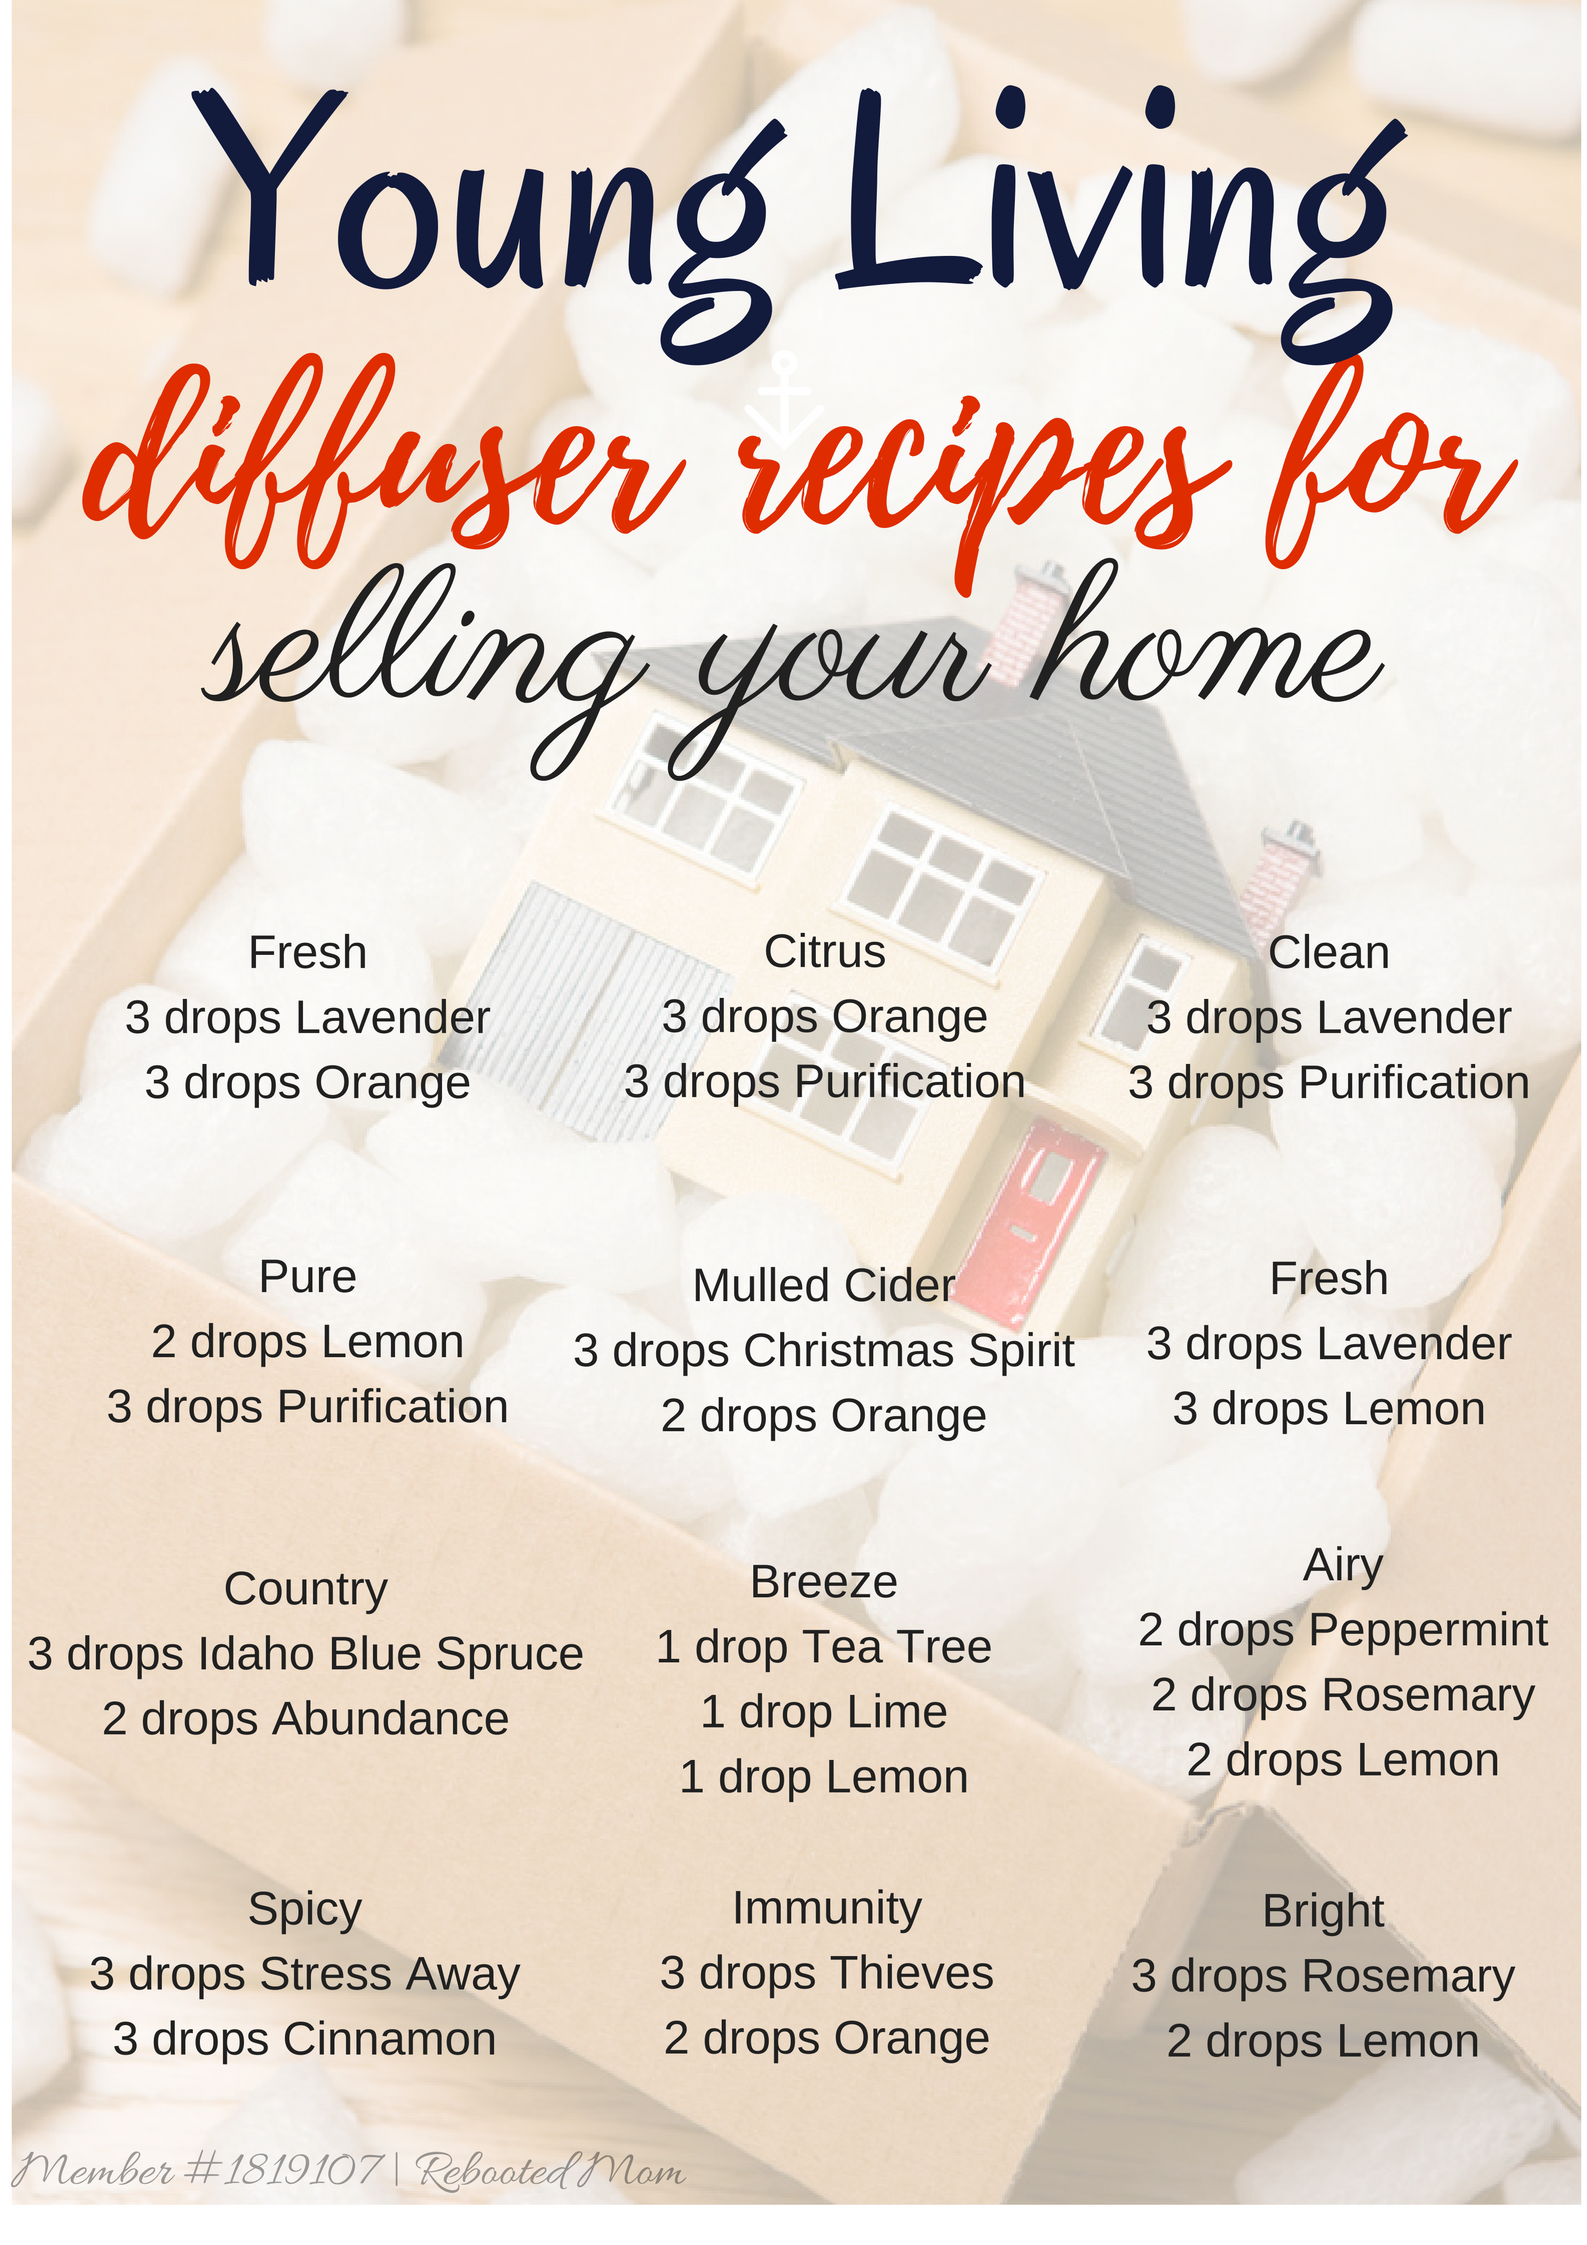 Young Living Diffuser Recipes for Selling your Home